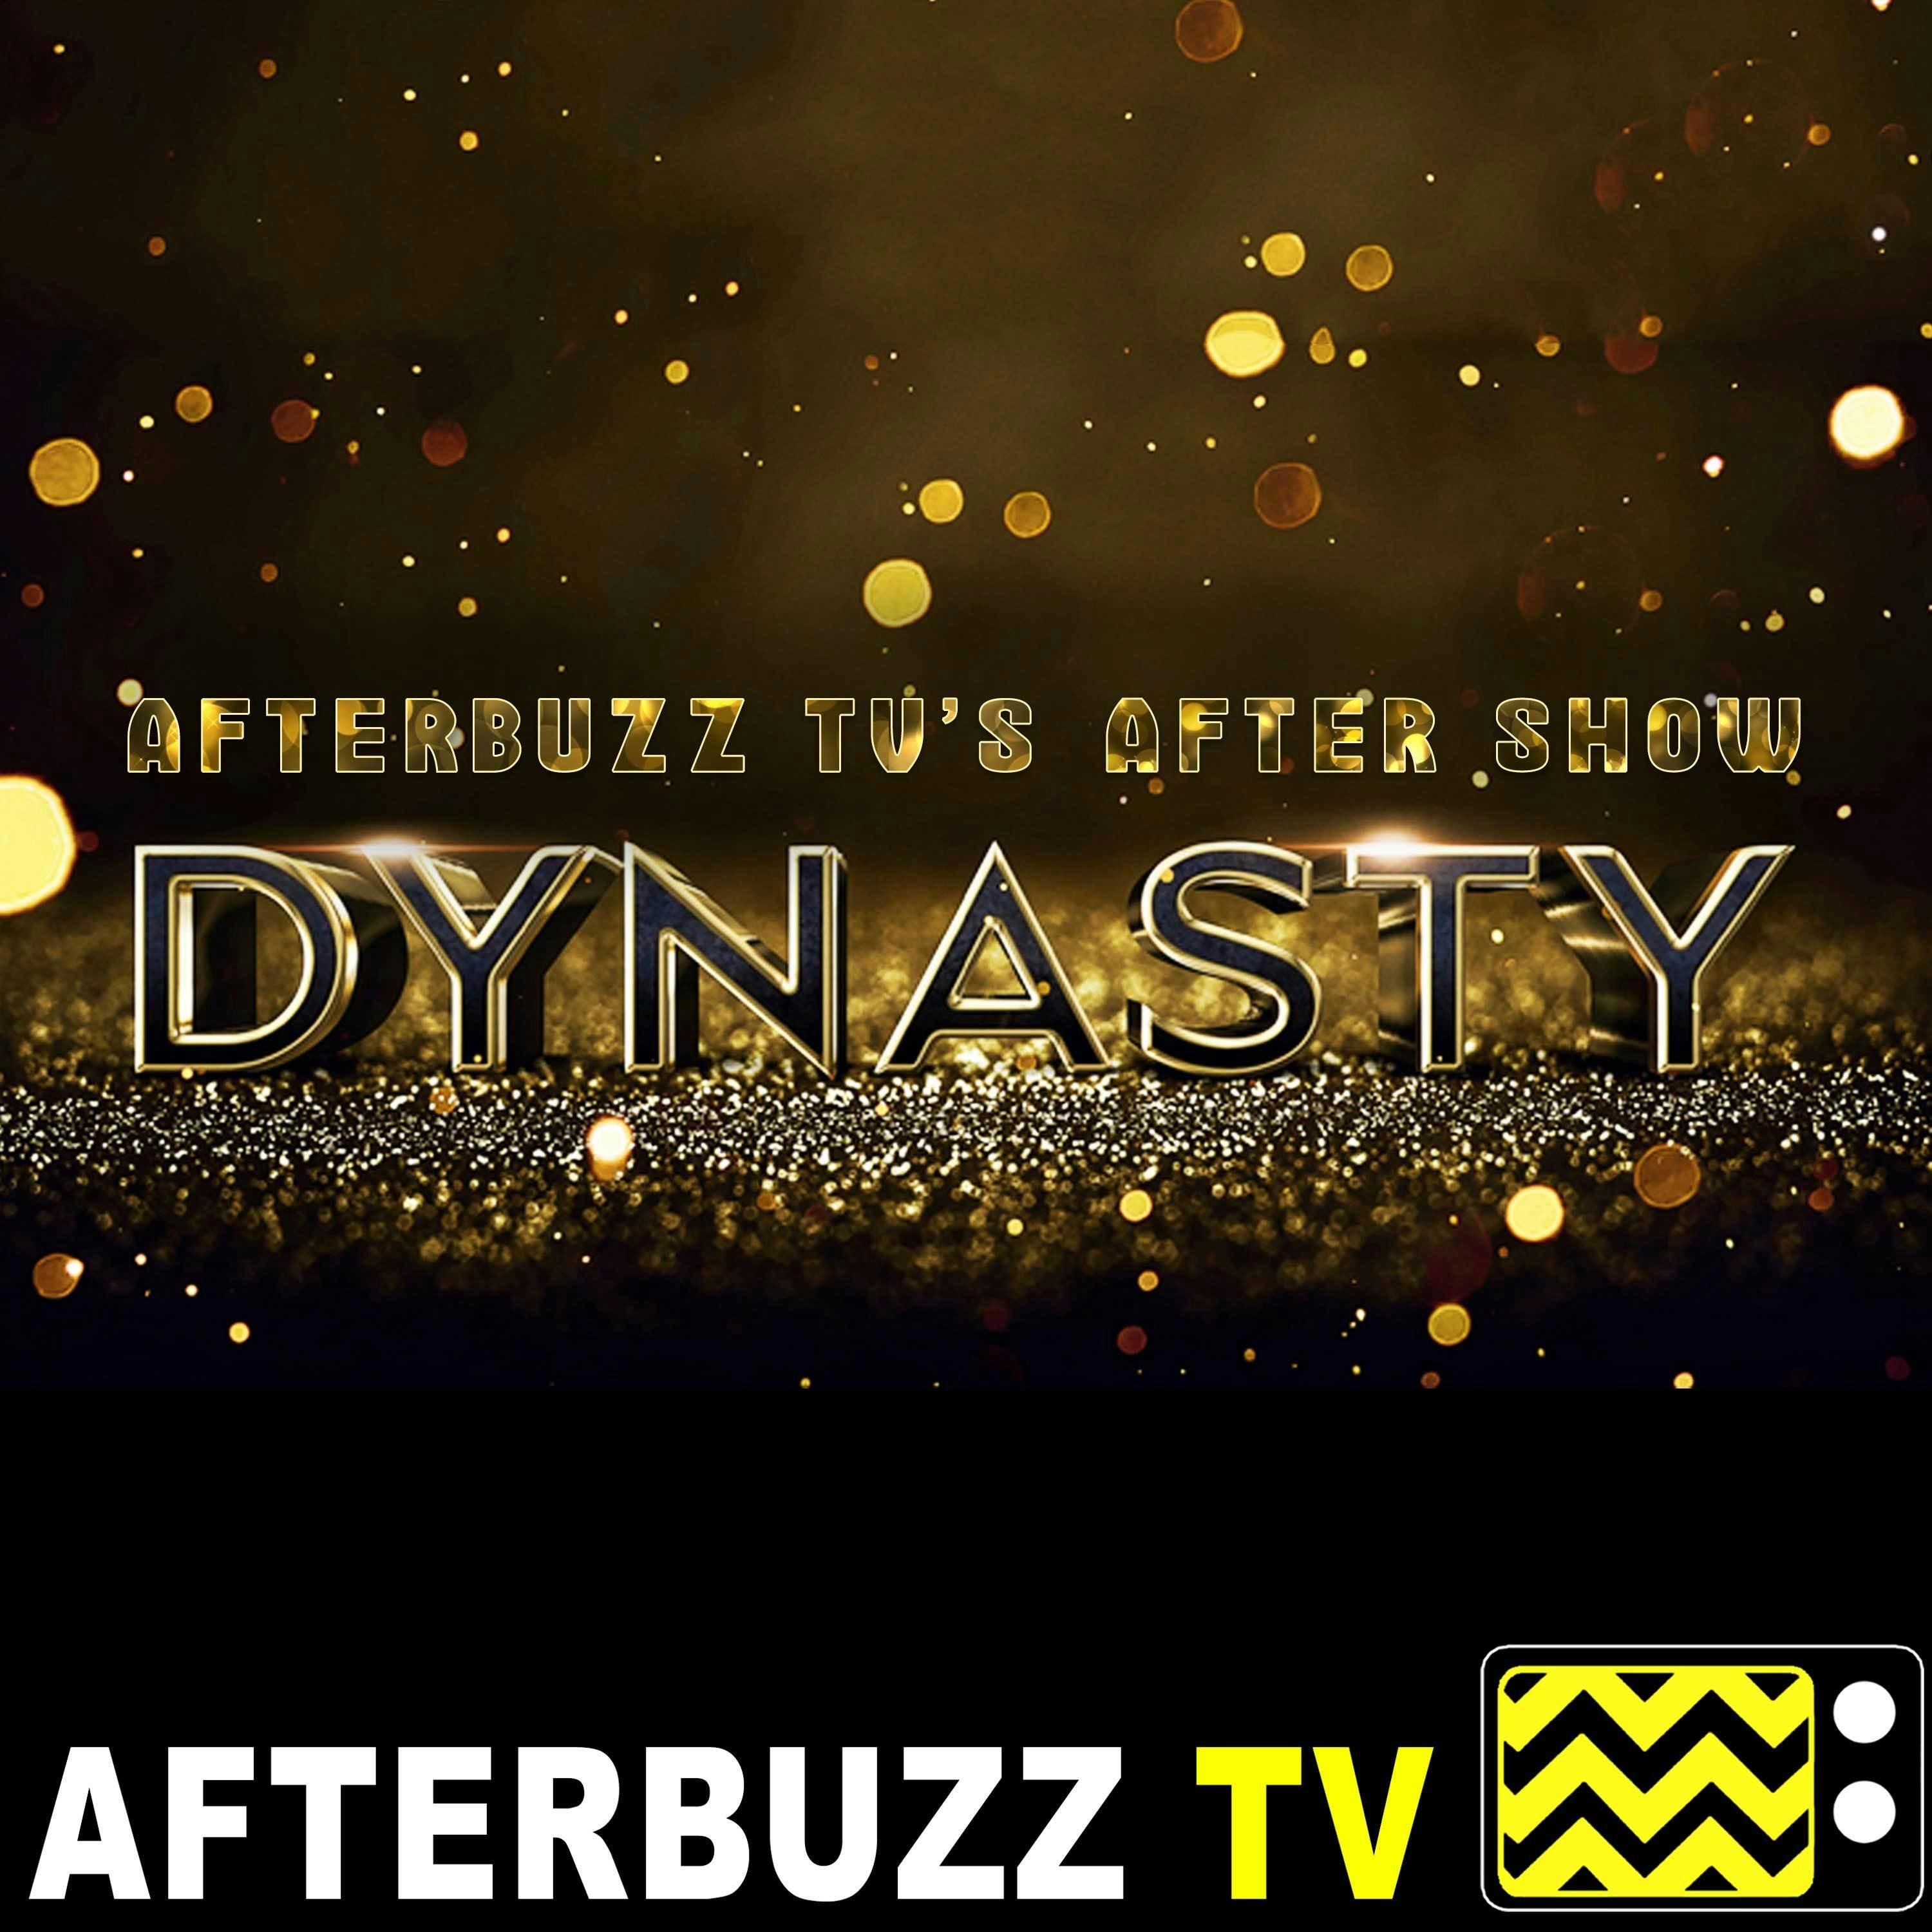 ”Motherly Overprotectiveness” Season 2 Episode 15 ’Dynasty’ Review